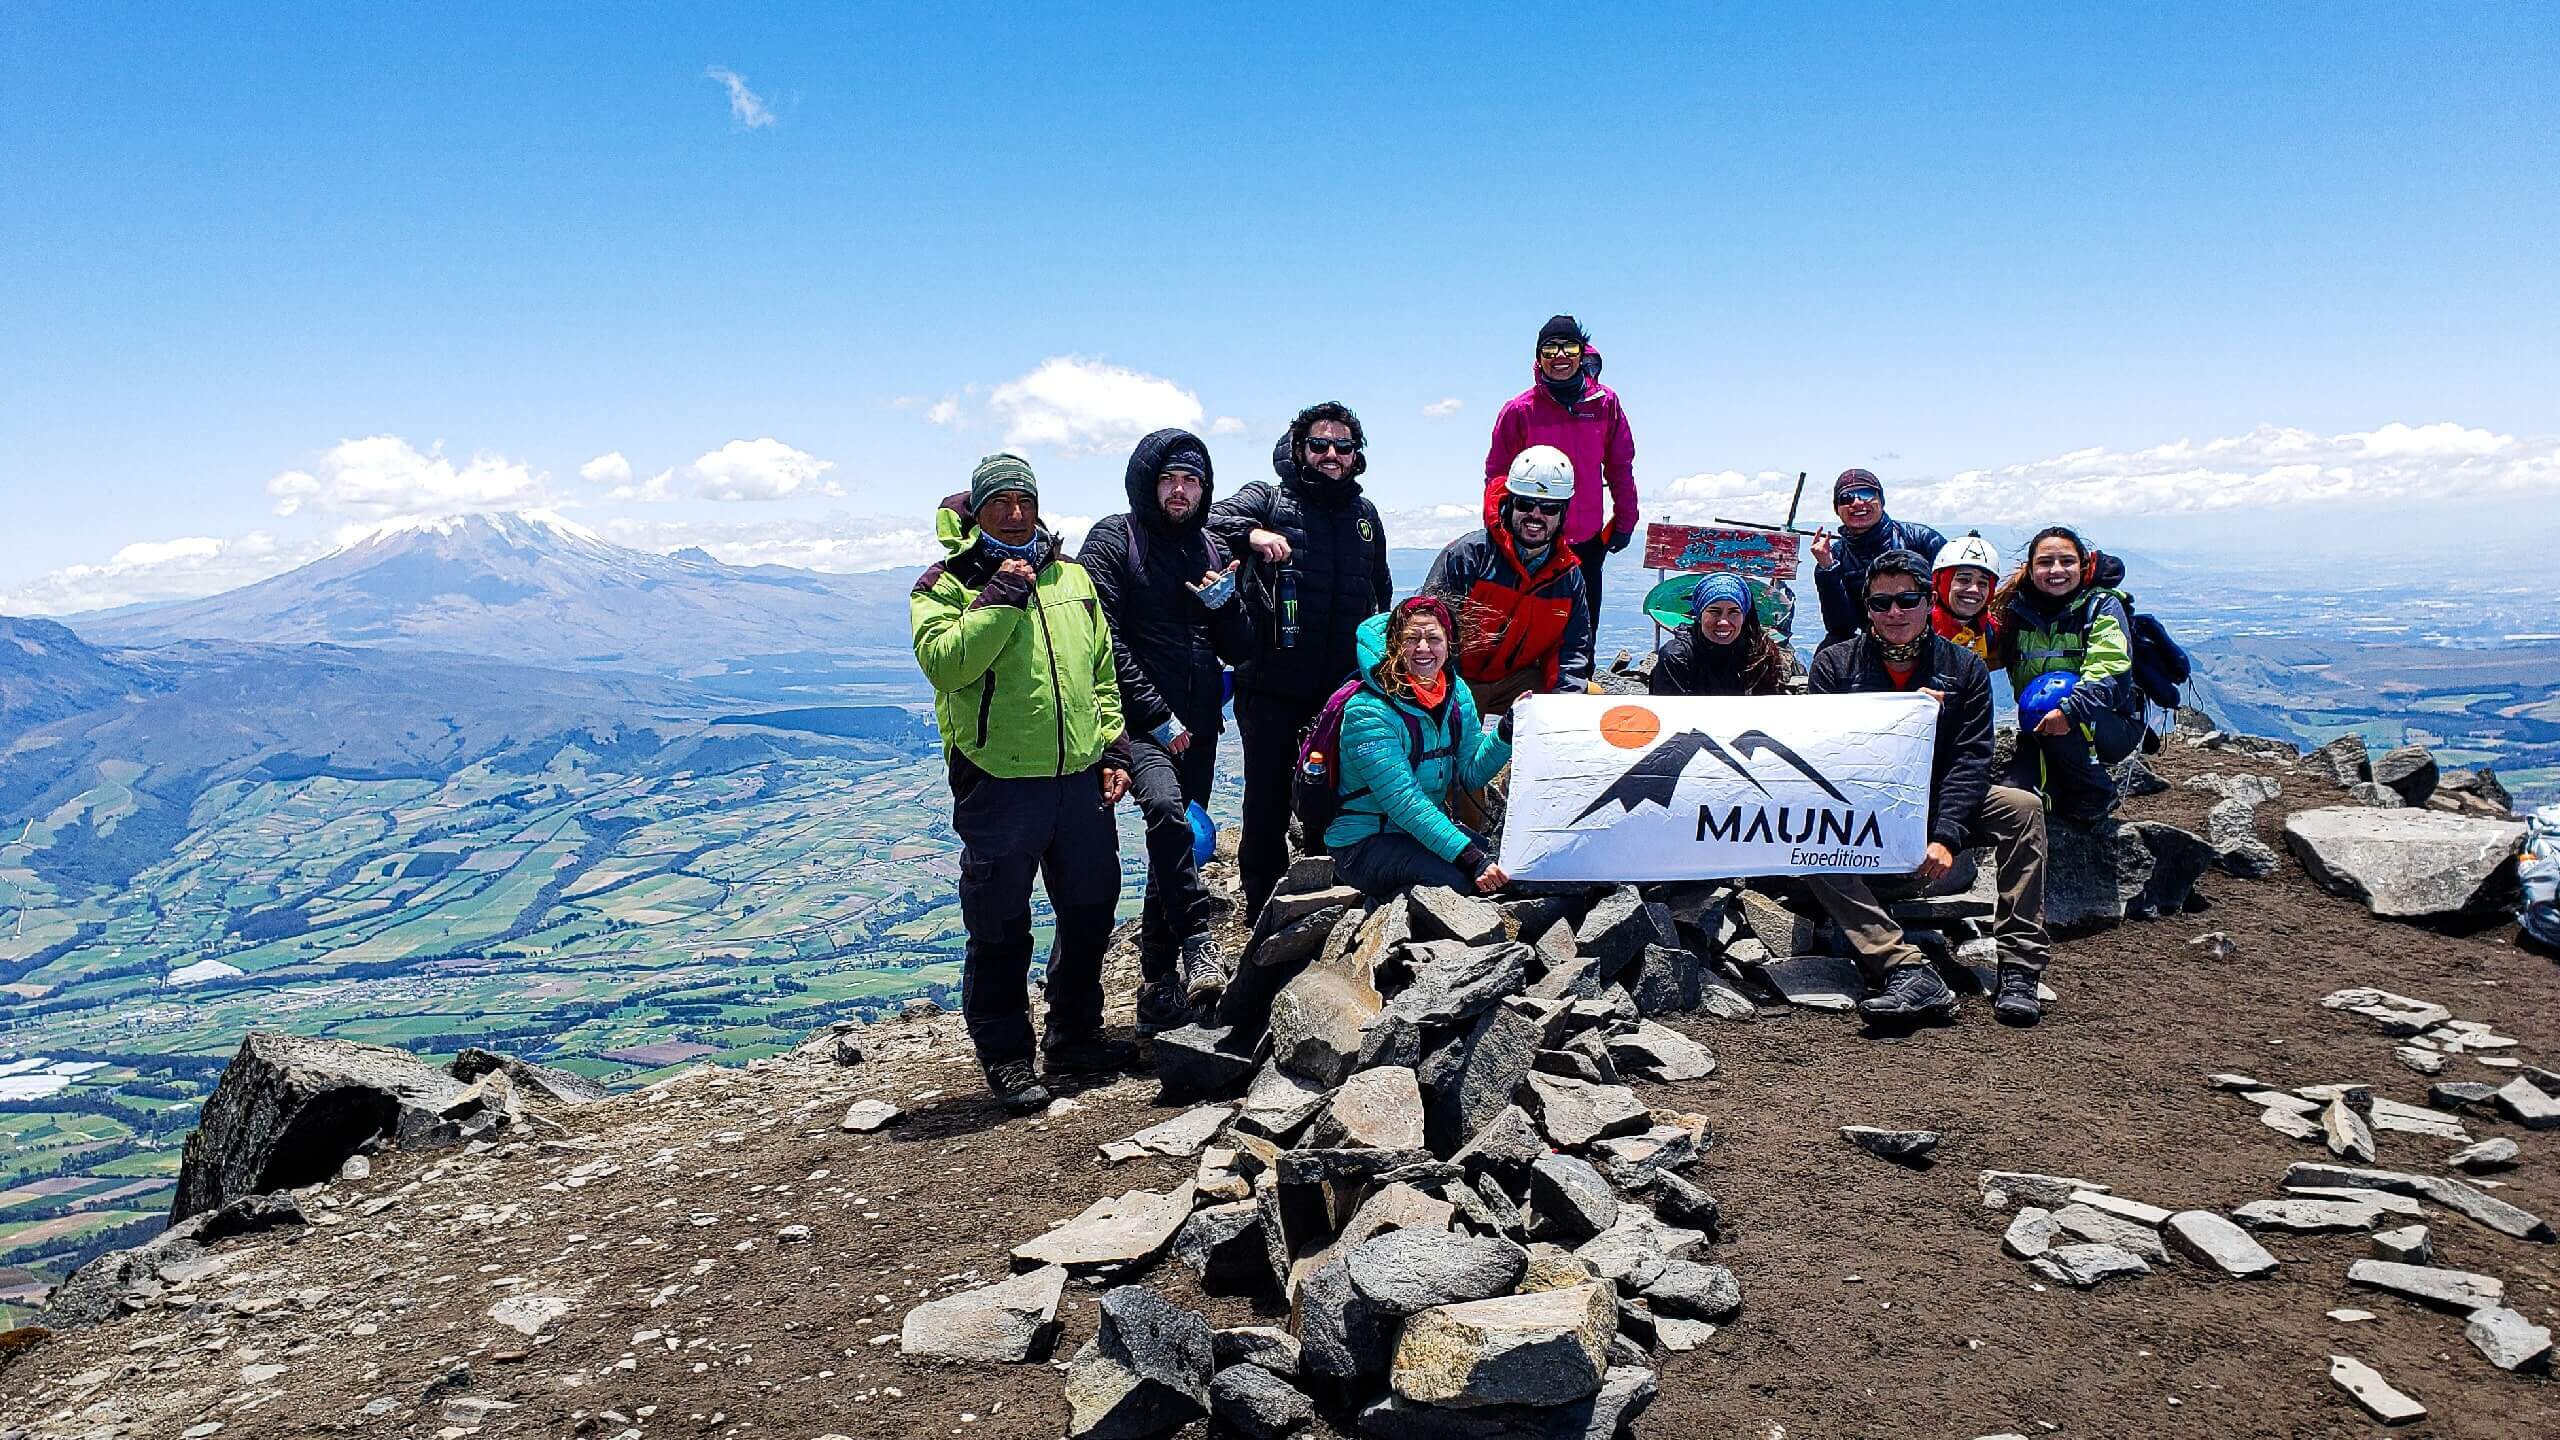 Mauna group in the summit of Corazon volcano